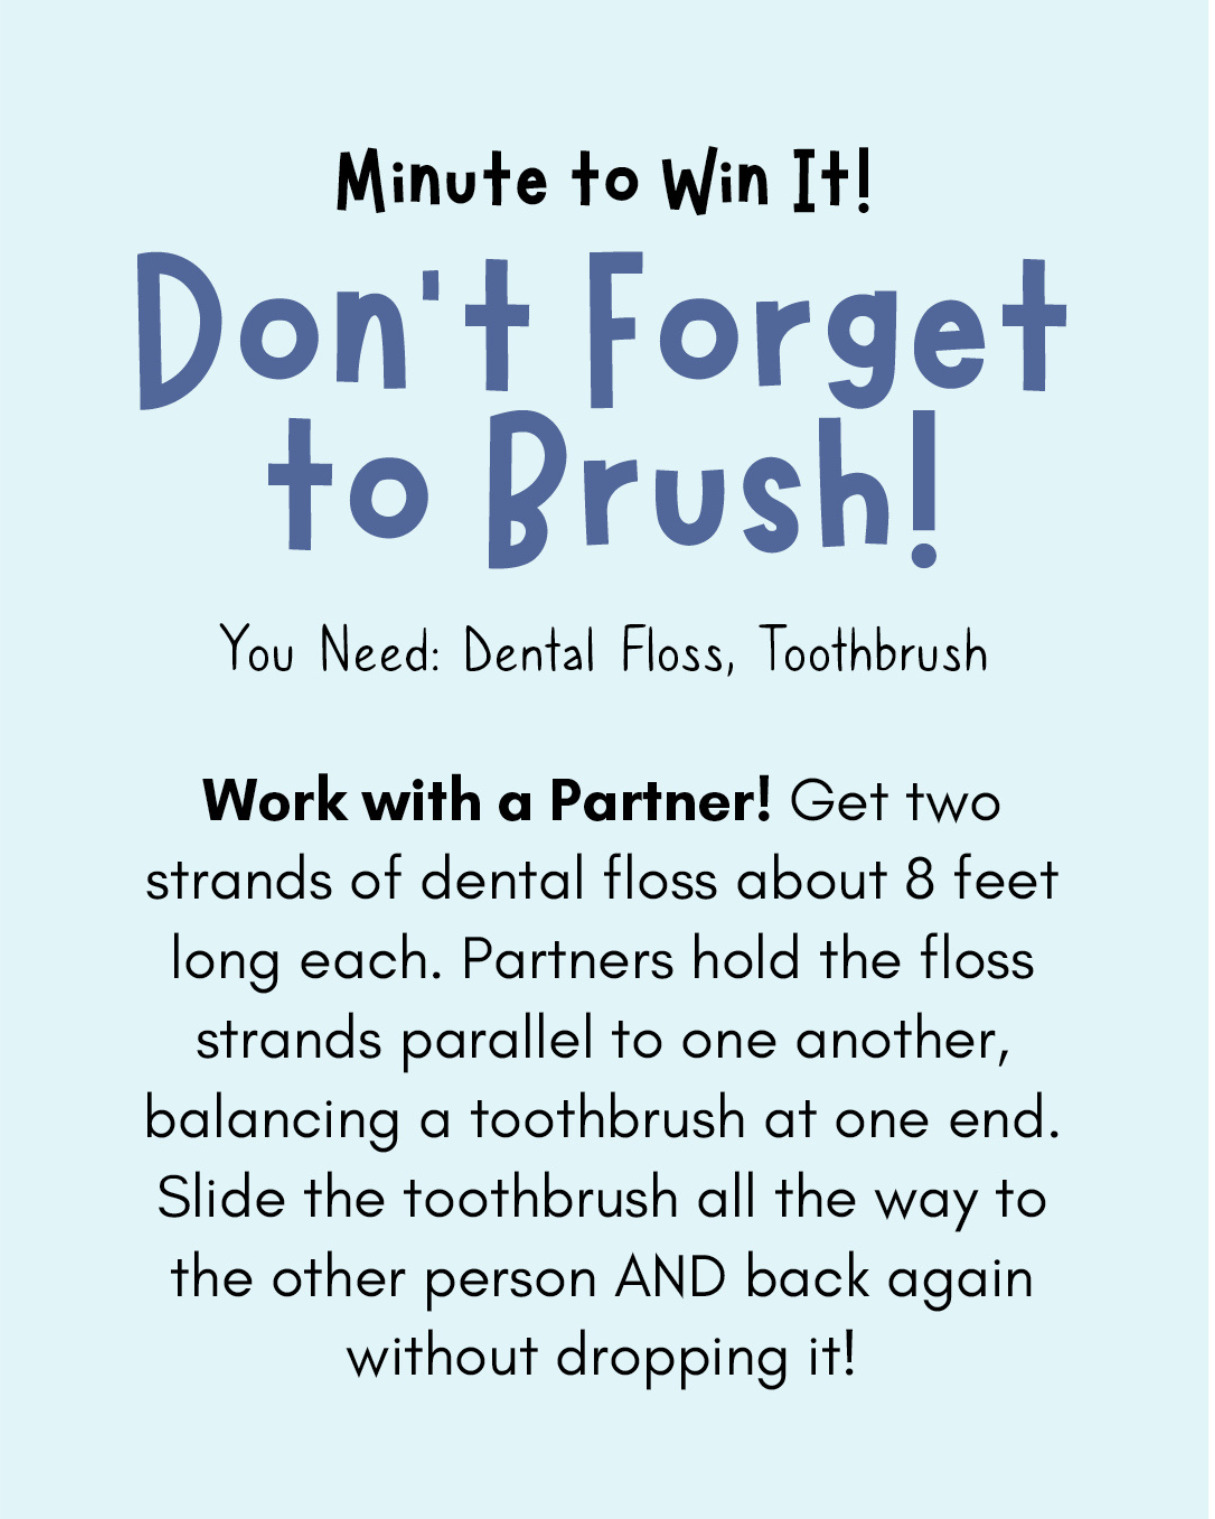 Minute to Win It Games for Families: Don't Forget to Brush